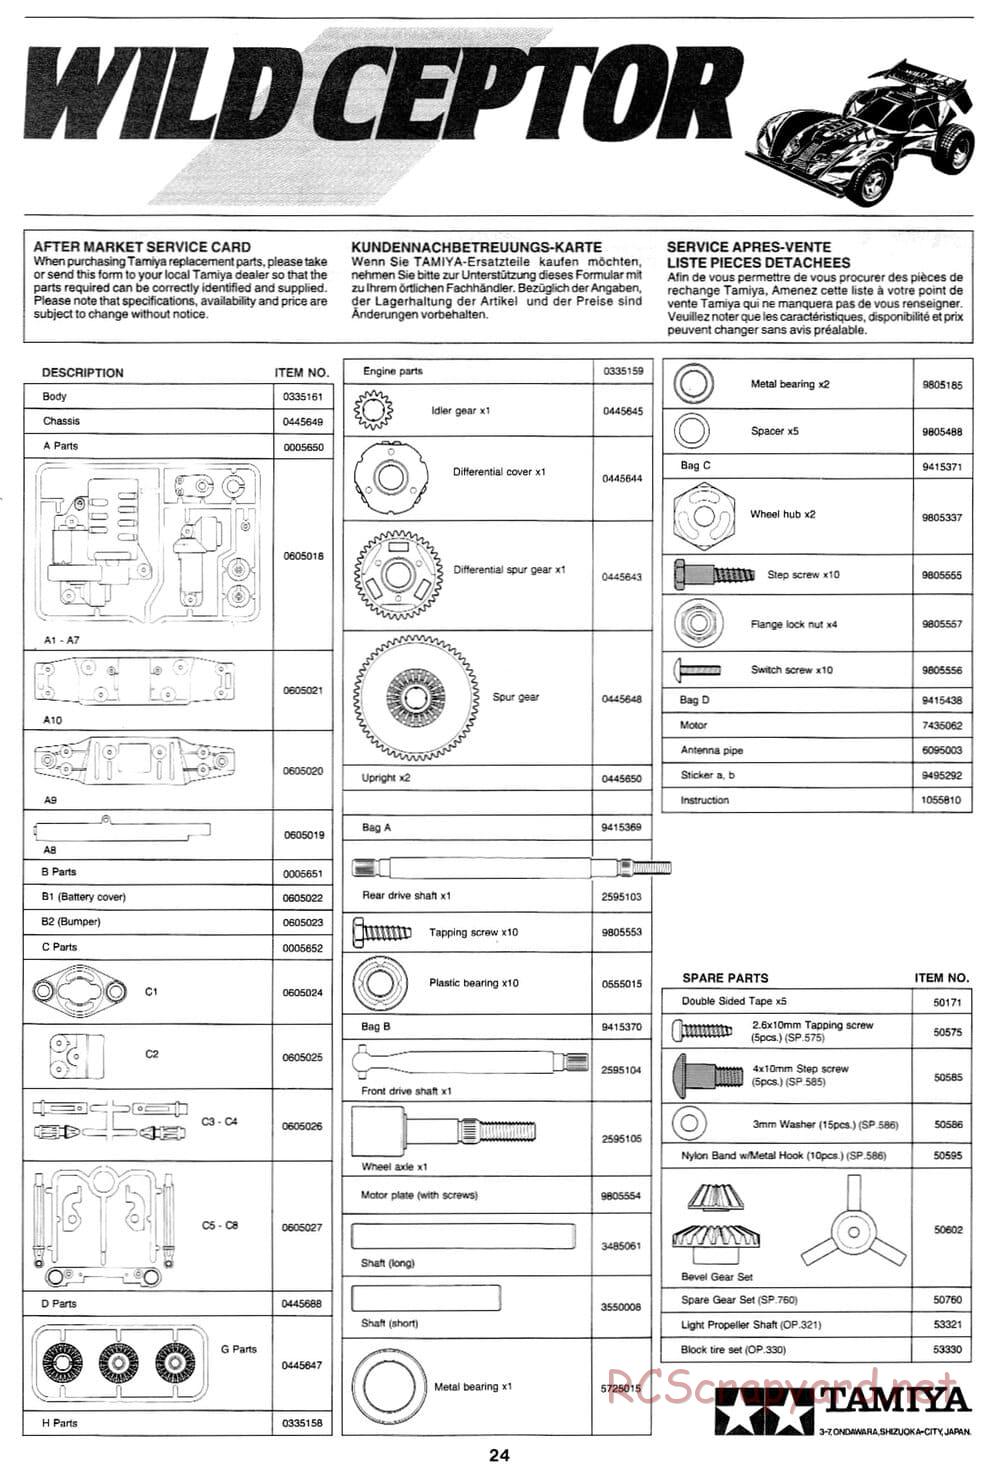 Tamiya - Wild Ceptor - Boy's 4WD Chassis - Manual - Page 24